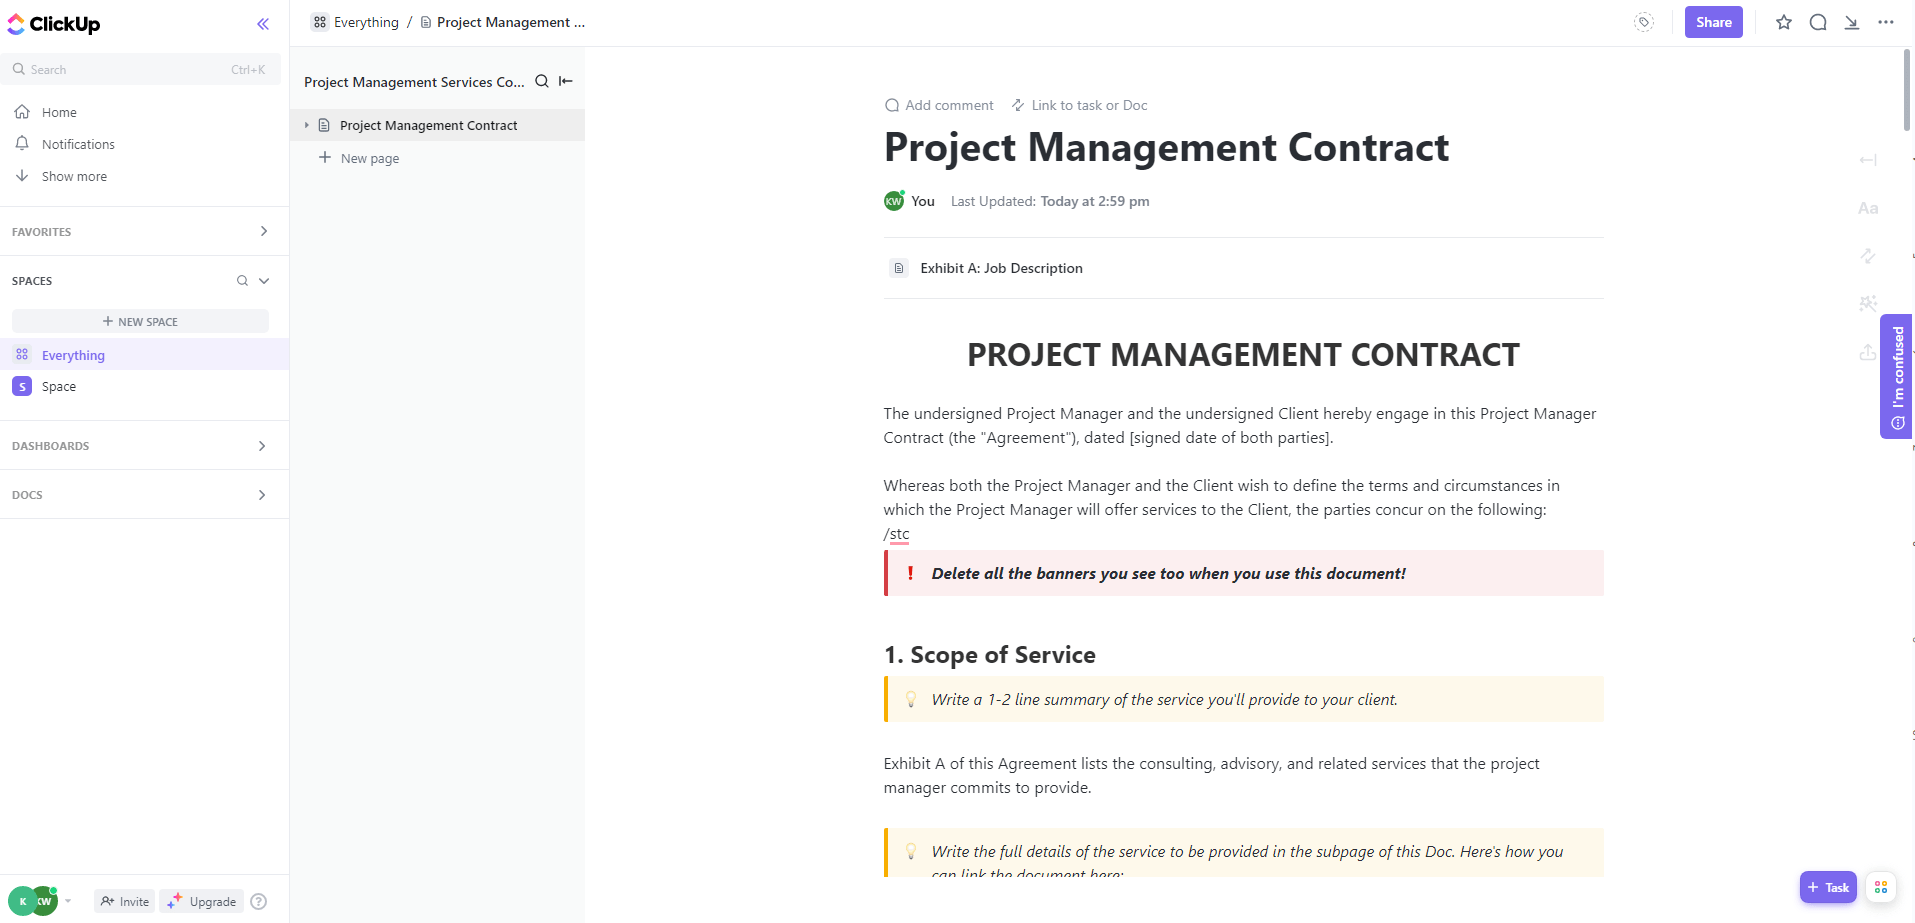 Use ClickUp’s Project Management Services Contract Template to cover legal details such as payments, liabilities, and more